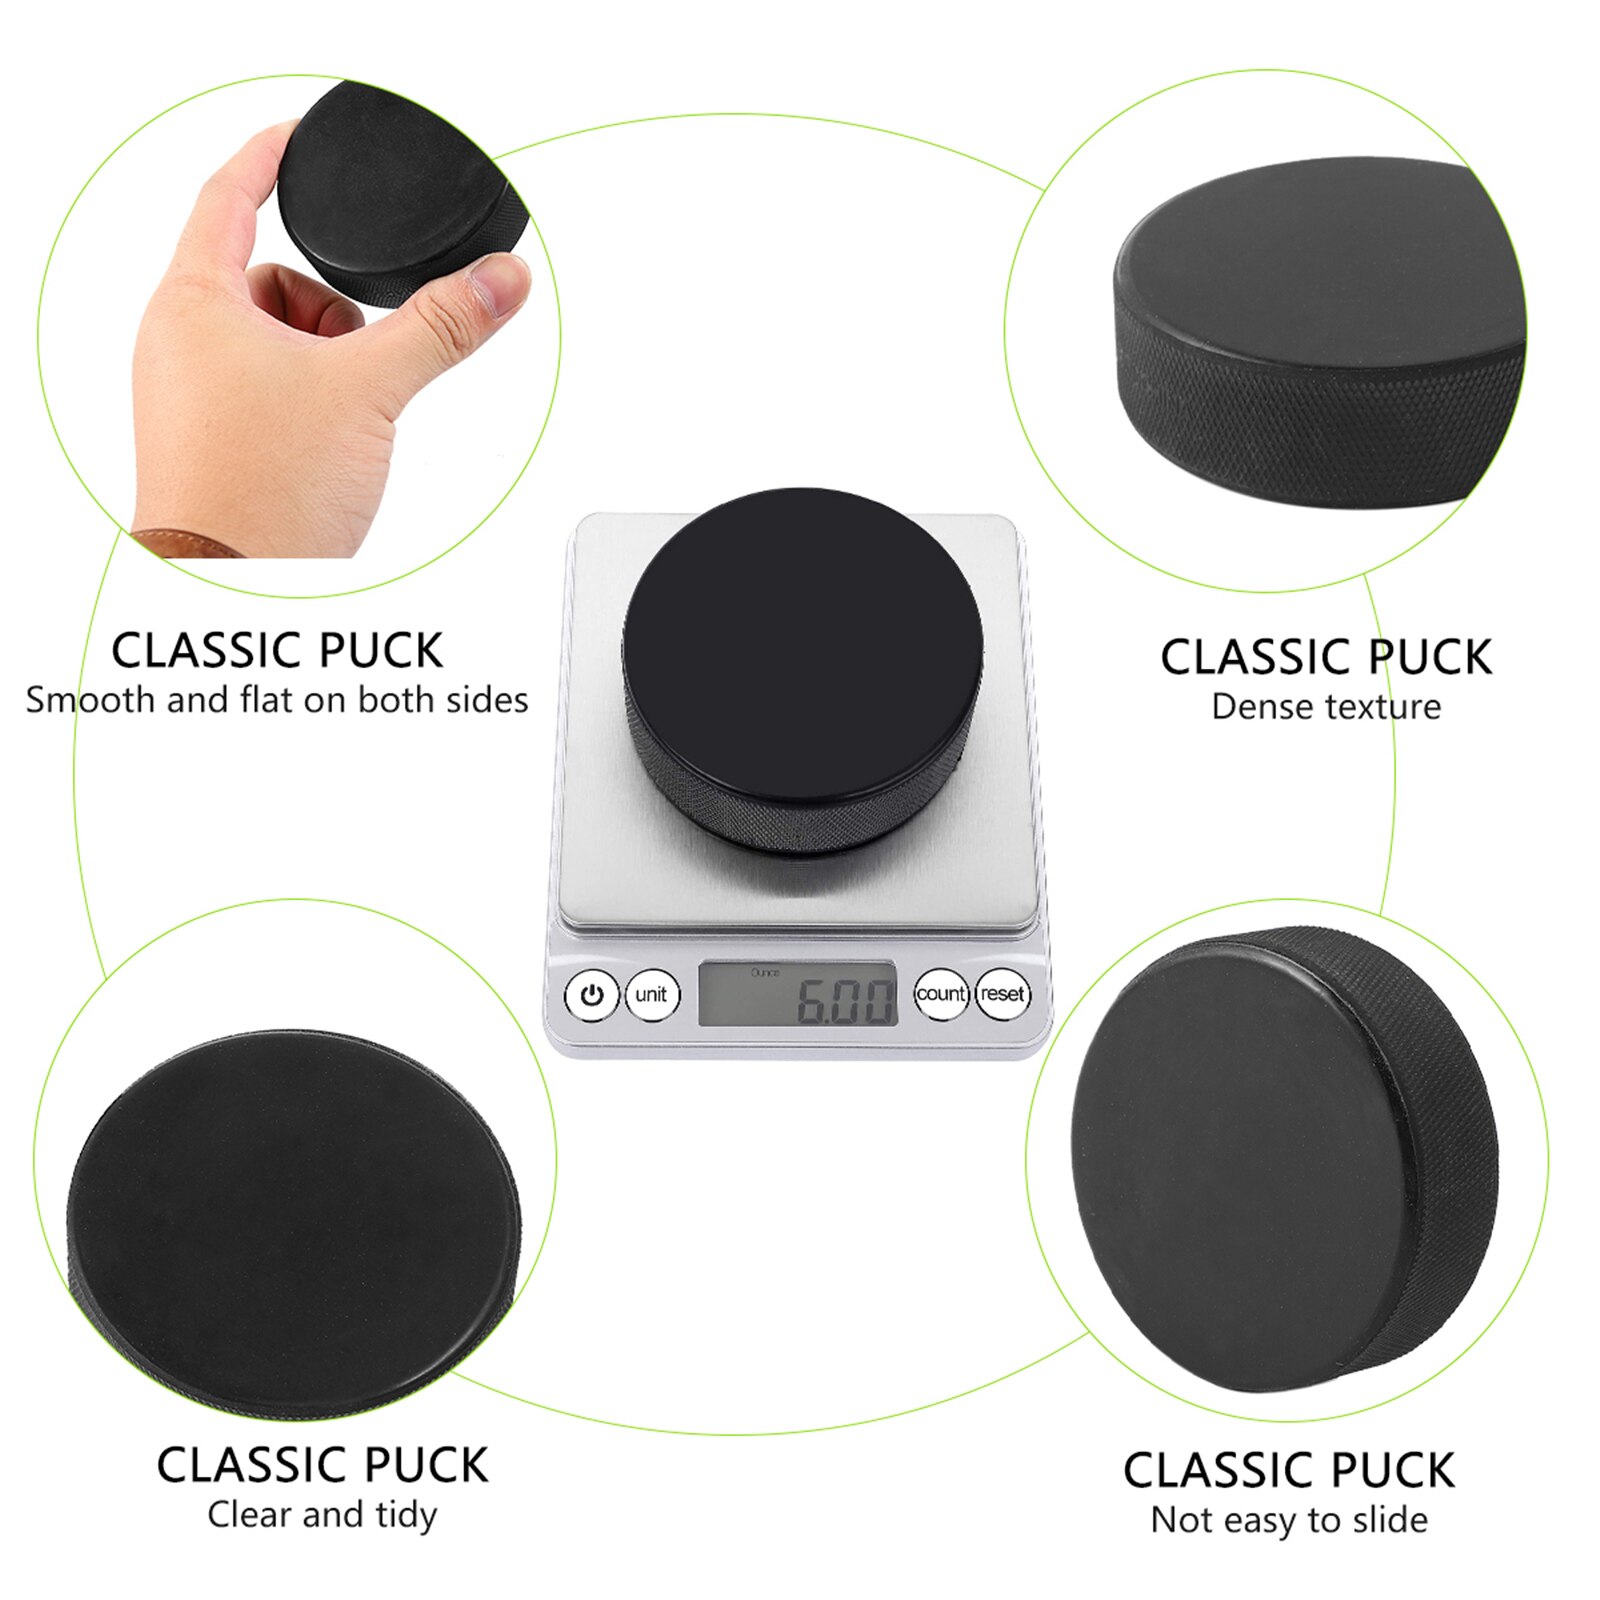 9pcs Classic Ice Hockey Pucks Black Sports Puck for Practicing and Training